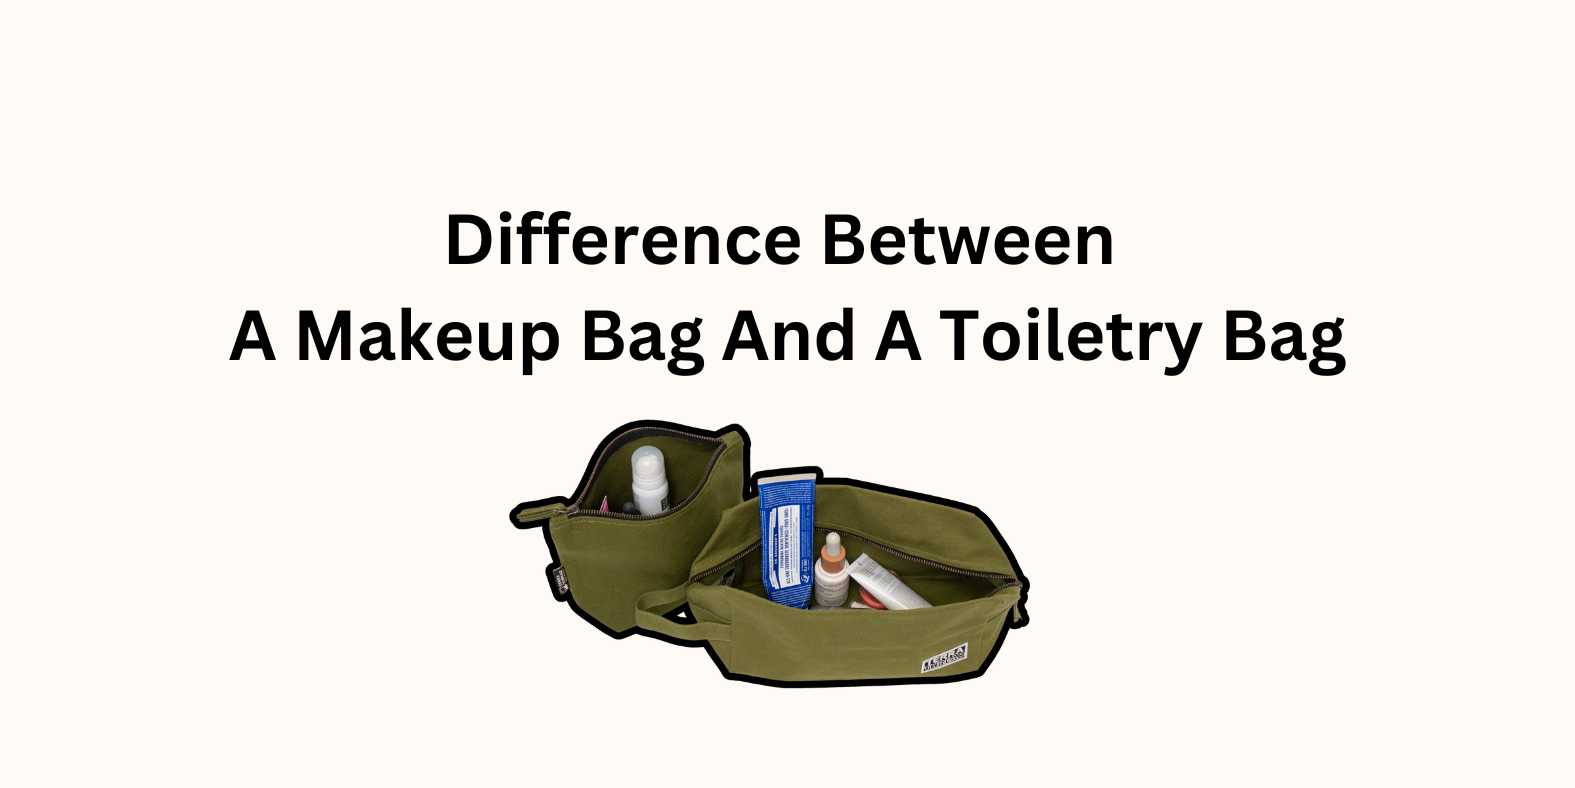 Difference Between A Makeup Bag And A Toiletry Bag